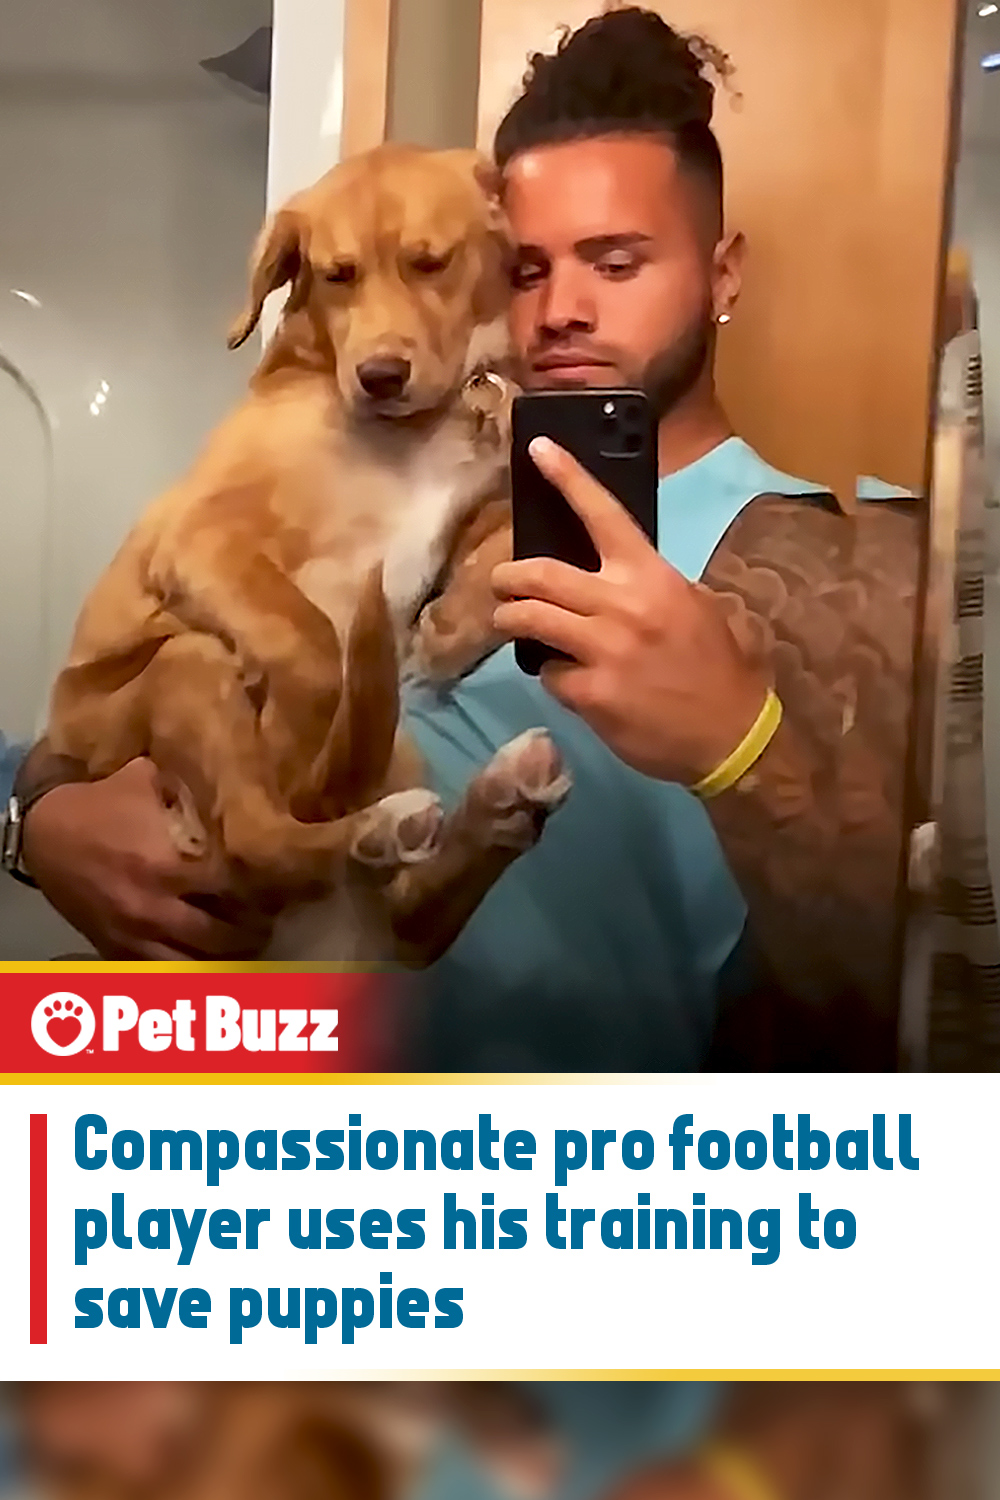 Compassionate pro football player uses his training to save puppies